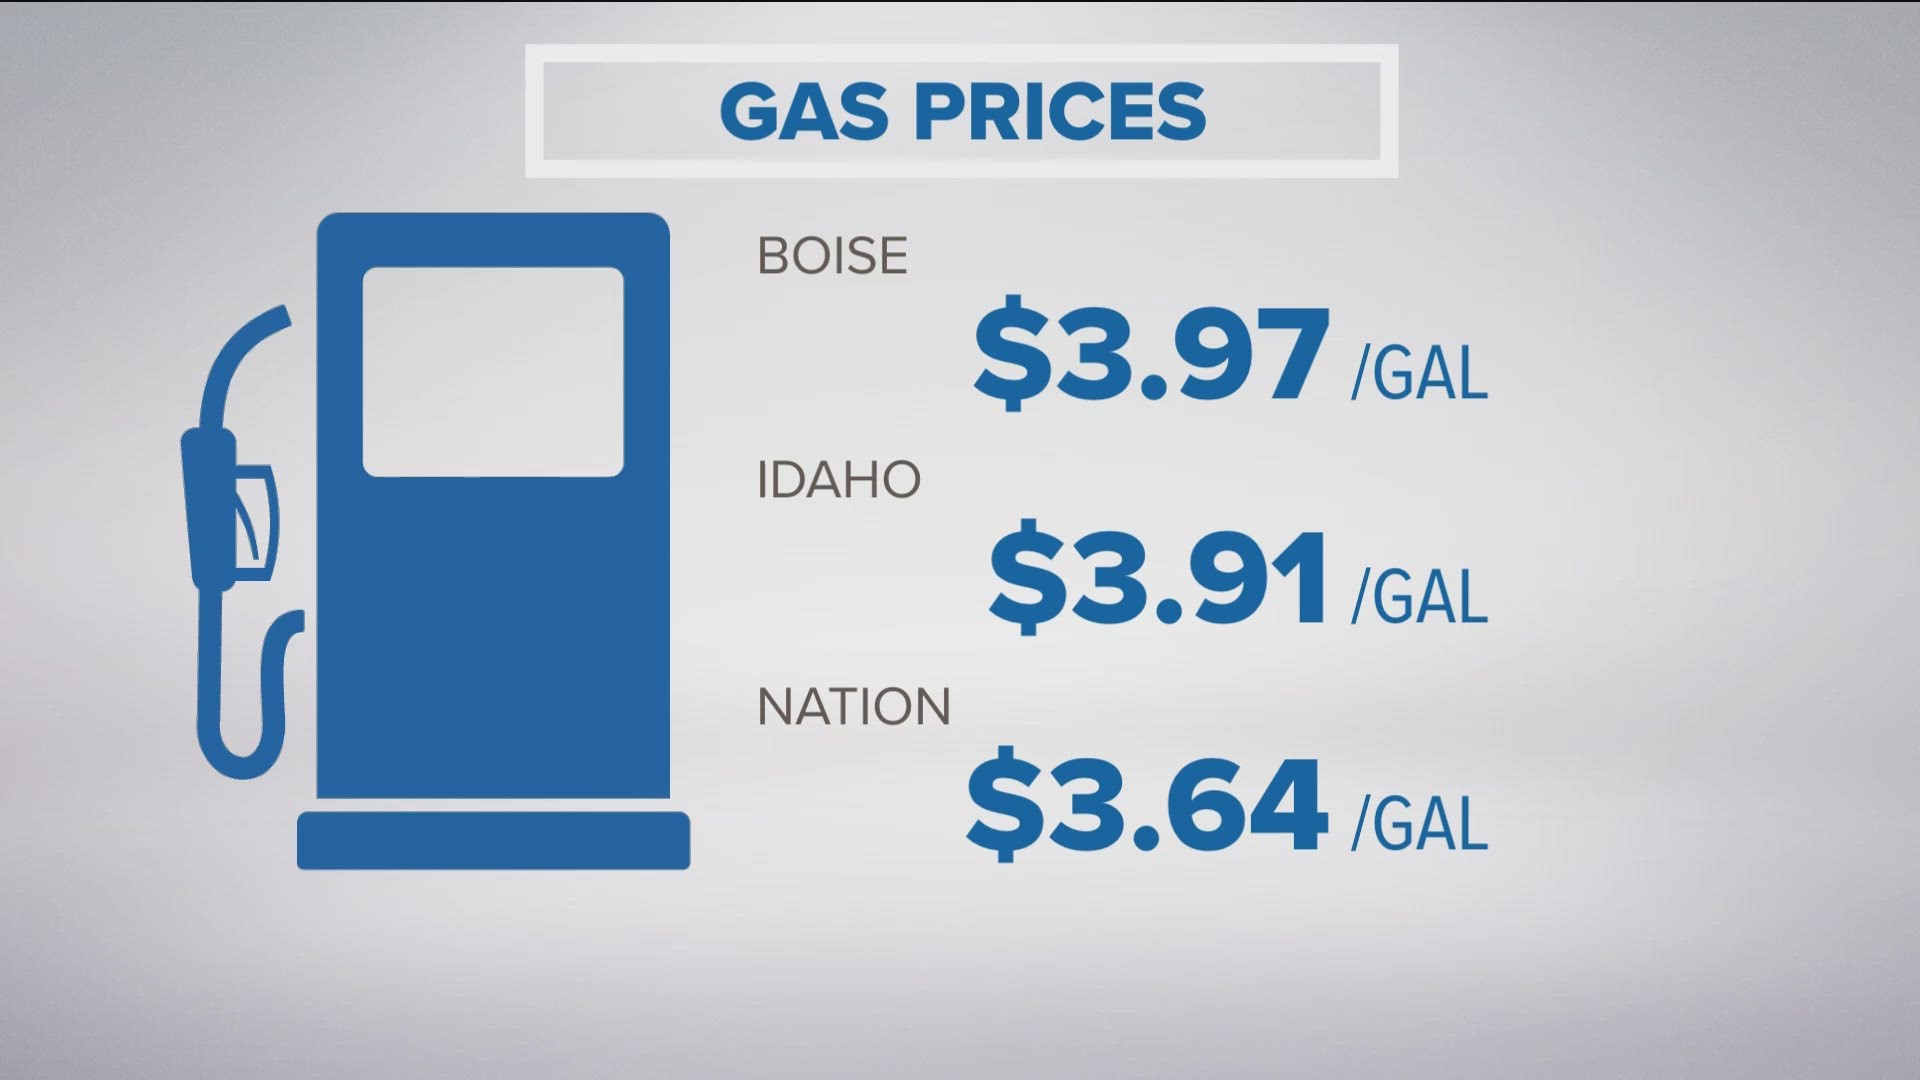 The cheapest station in Boise on Sunday was priced at $3.85 per gallon and the most expensive station was priced at $4.03 per gallon, a difference of 18 cents.